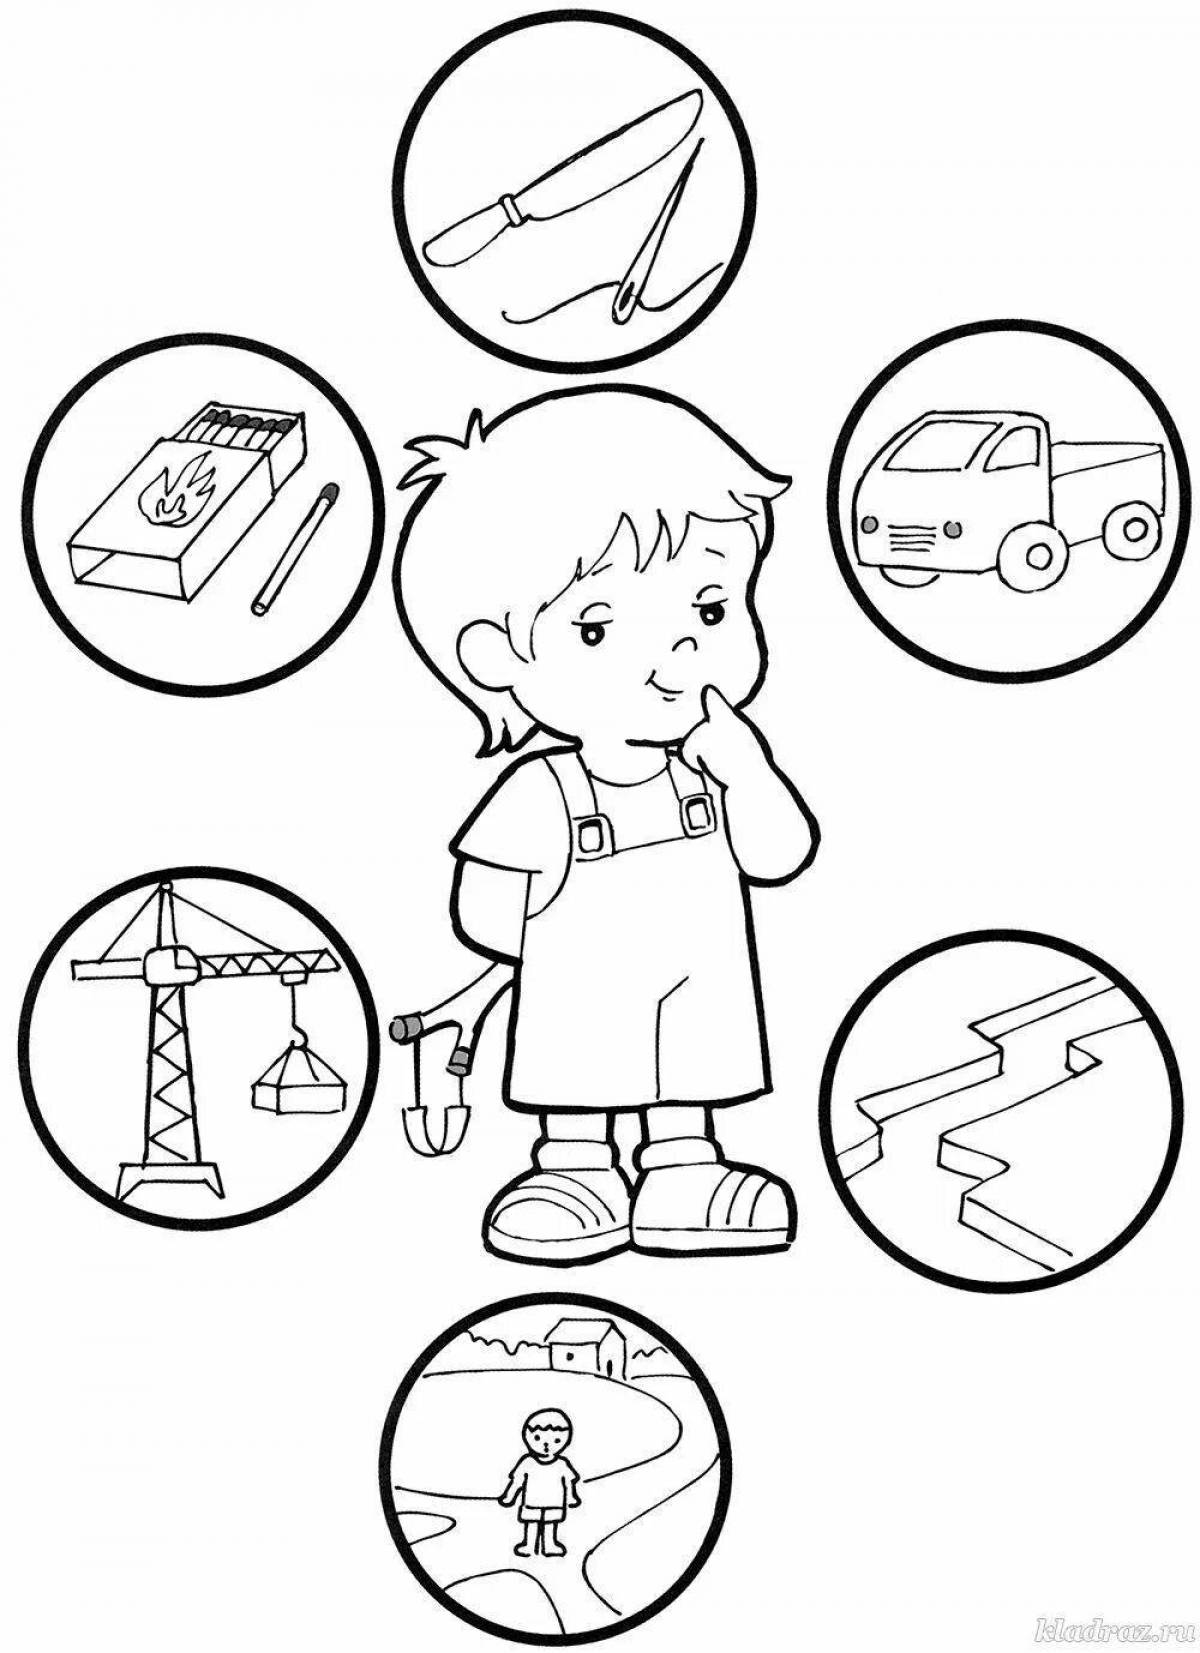 Colored Preschool Safety Coloring Book